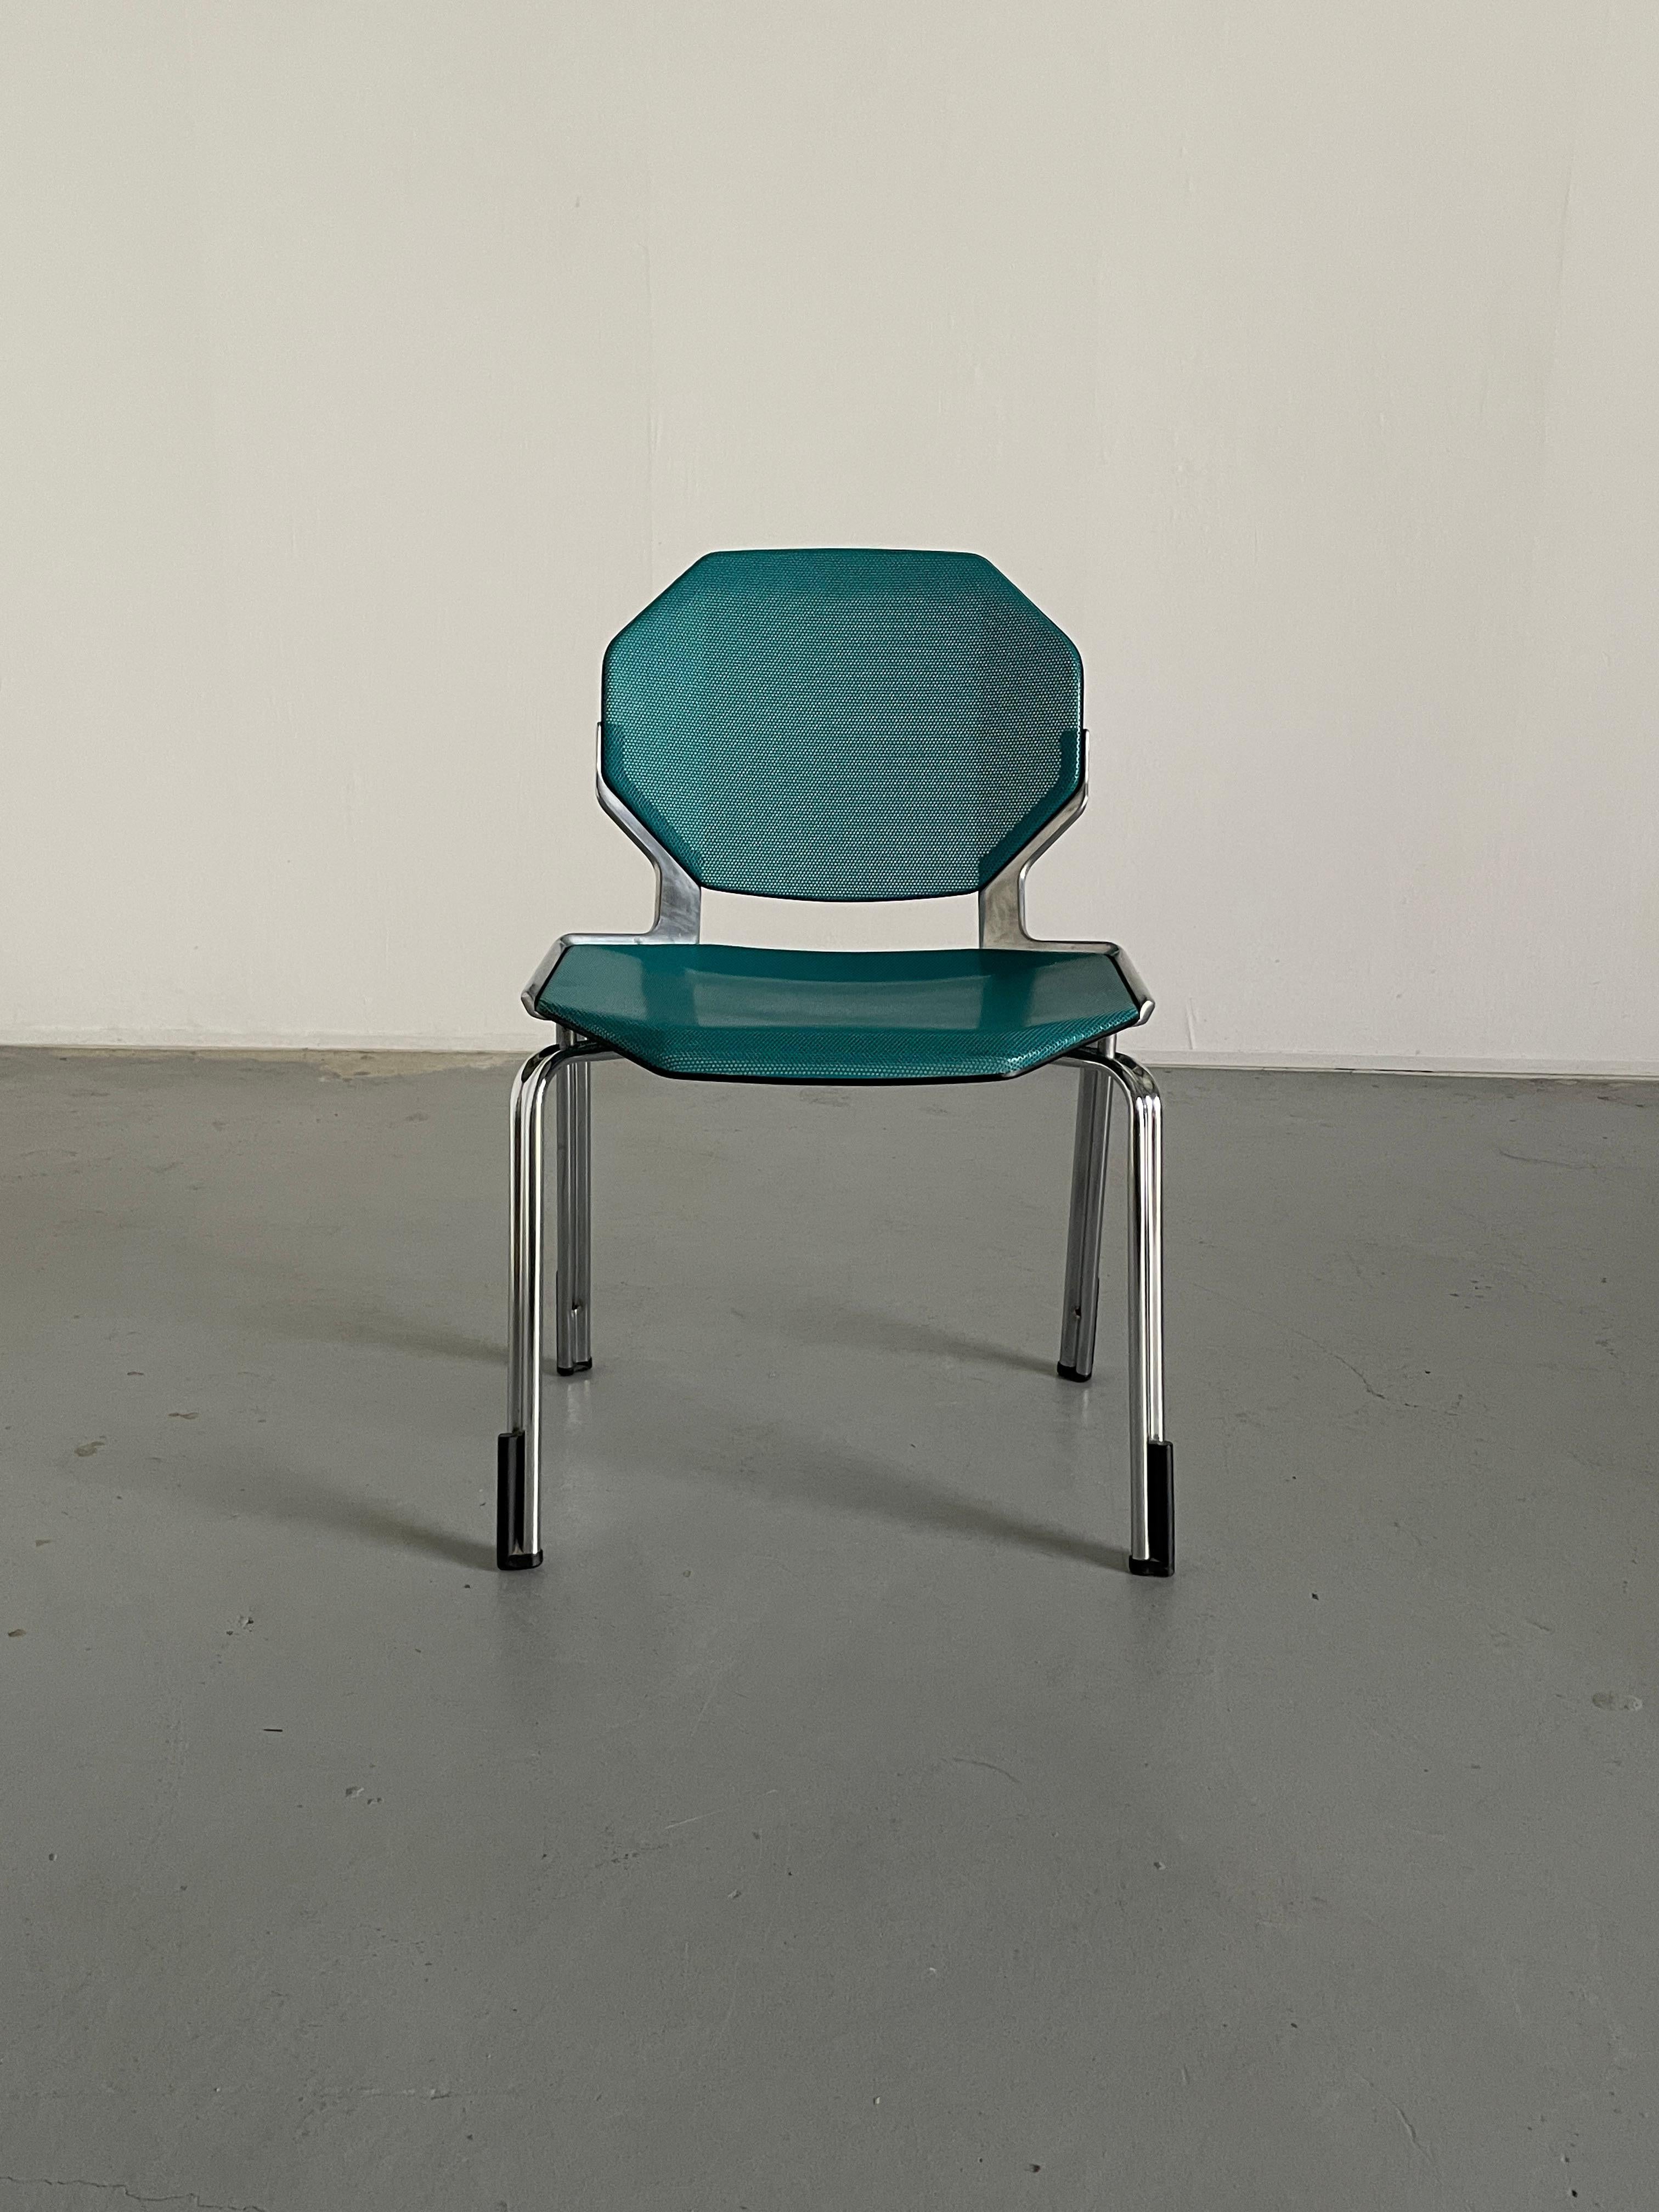 Late 20th Century Space Age Futuristic Octagonal Stackable Dining Chairs by Fröscher Sitform, 90s For Sale